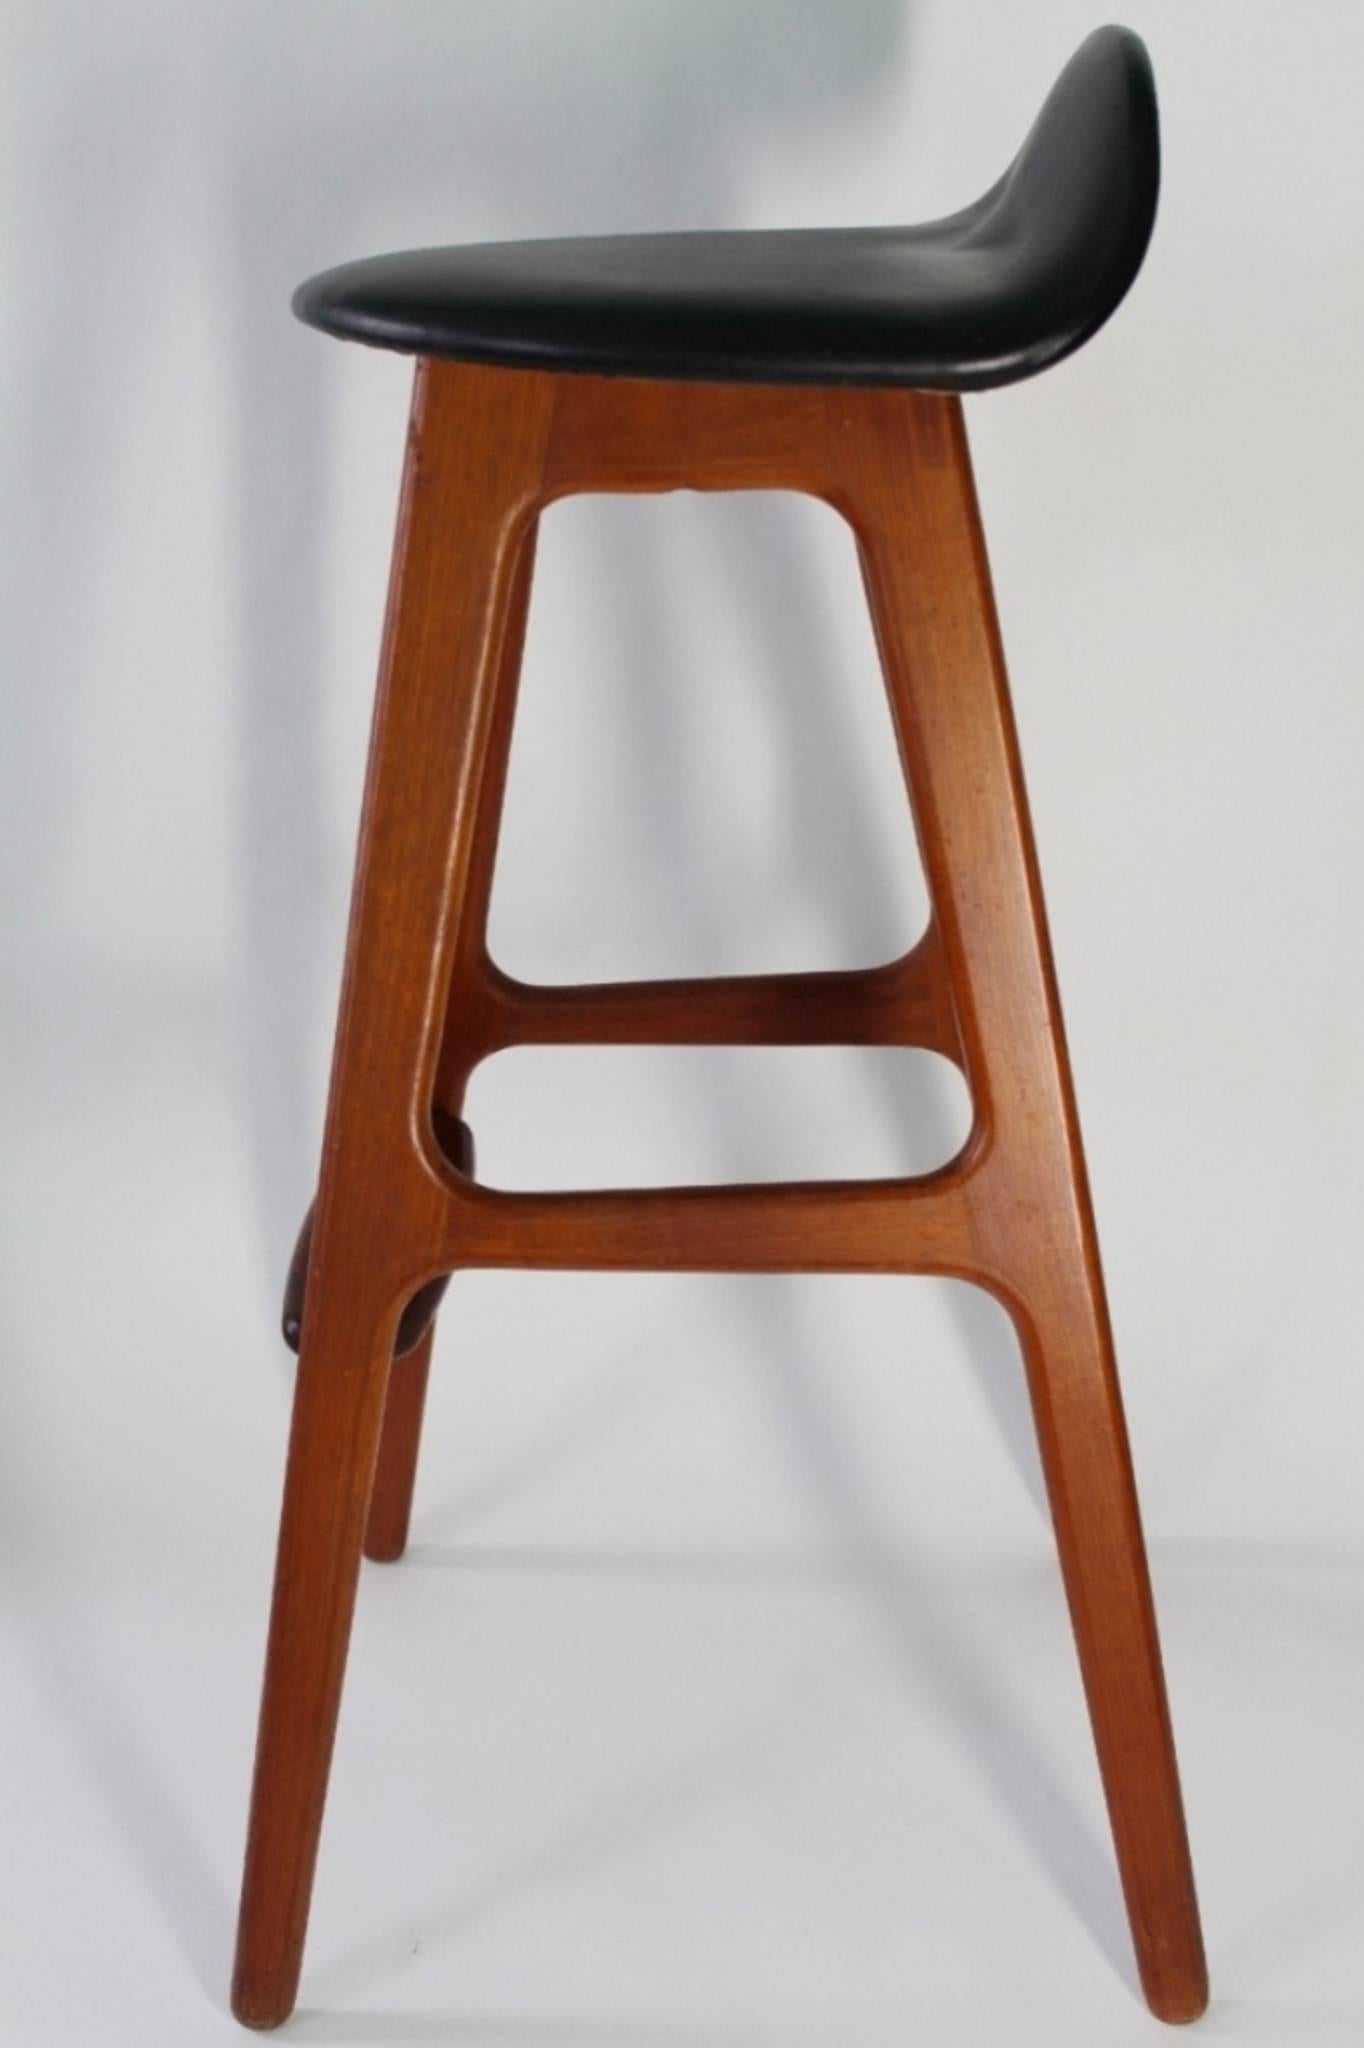 Danish modern teak stool designed by Erik Buch for Oddense Maskinsnedkeri. The stool features its original label. In very good vintage condition having wear consistent with age and use. 

Only one available.